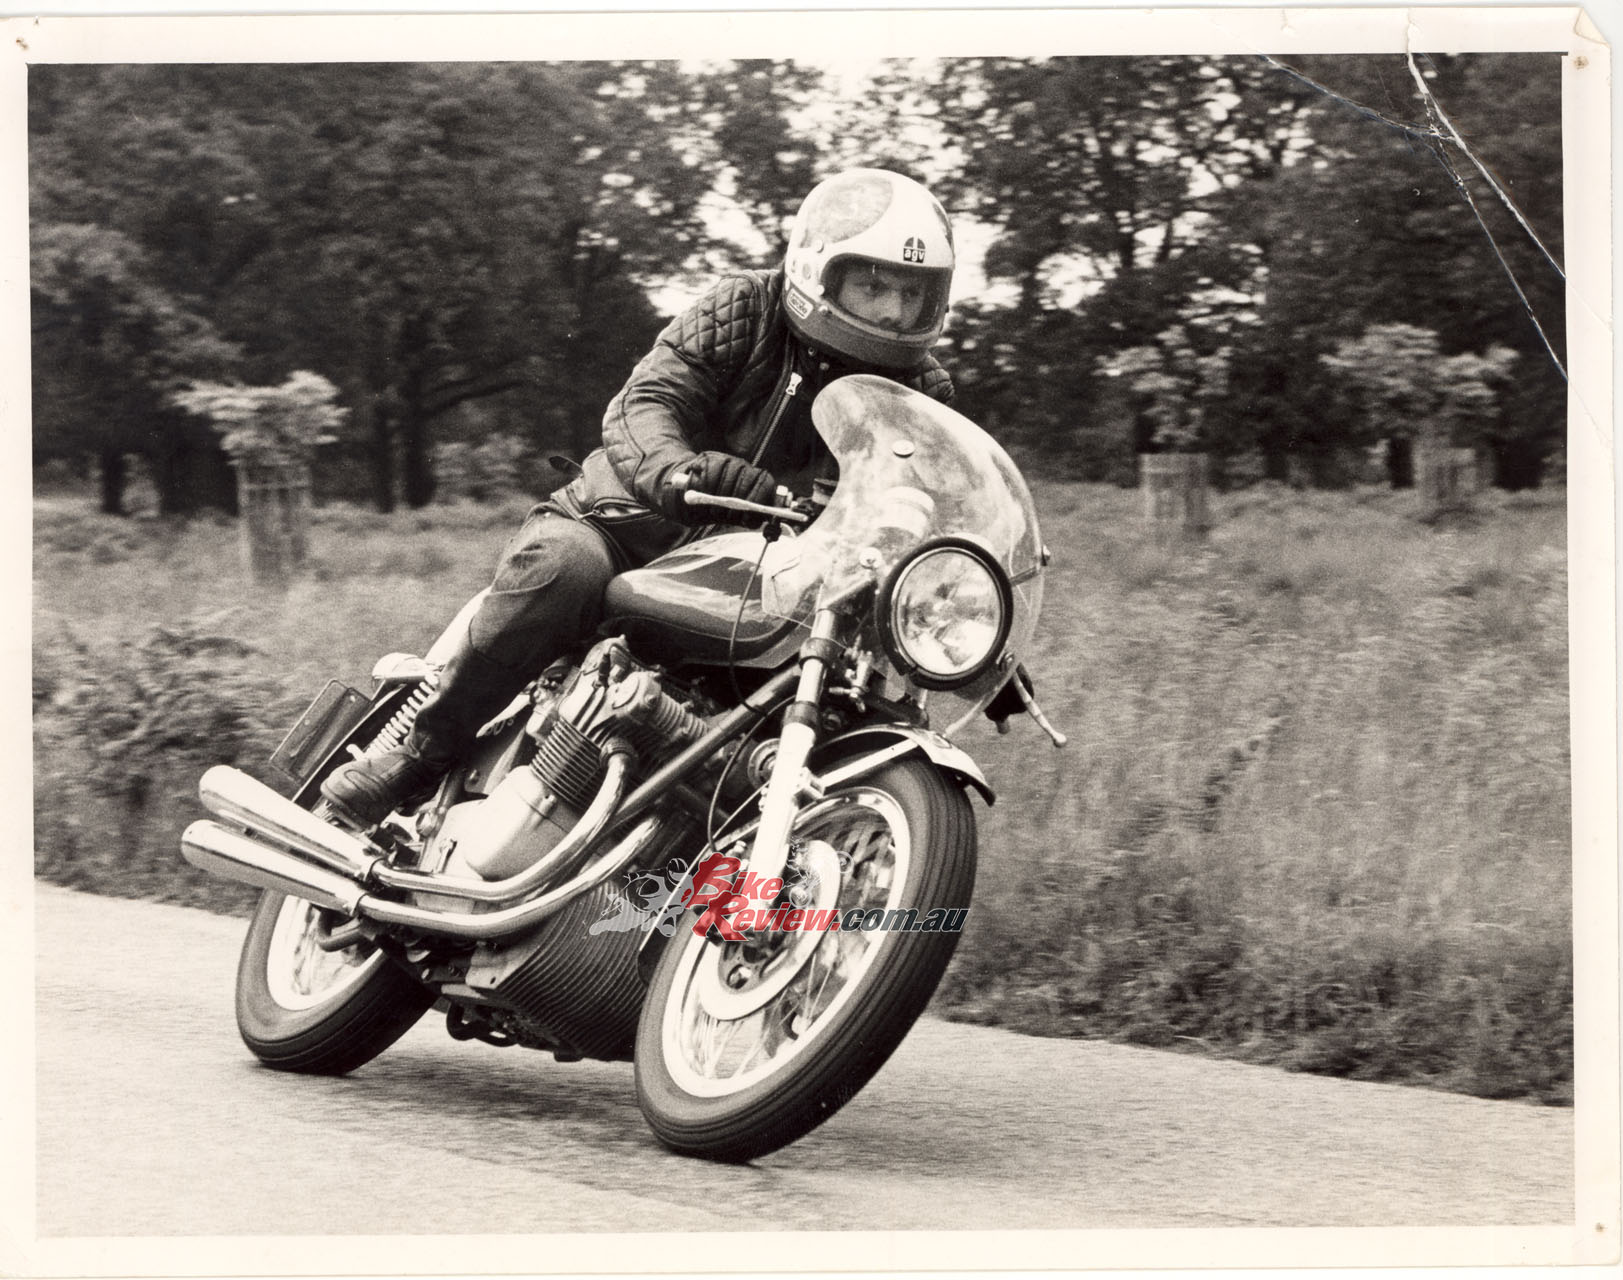 John testing the MV Agusta 750S at the Motor Industry Research Association’s proving ground.